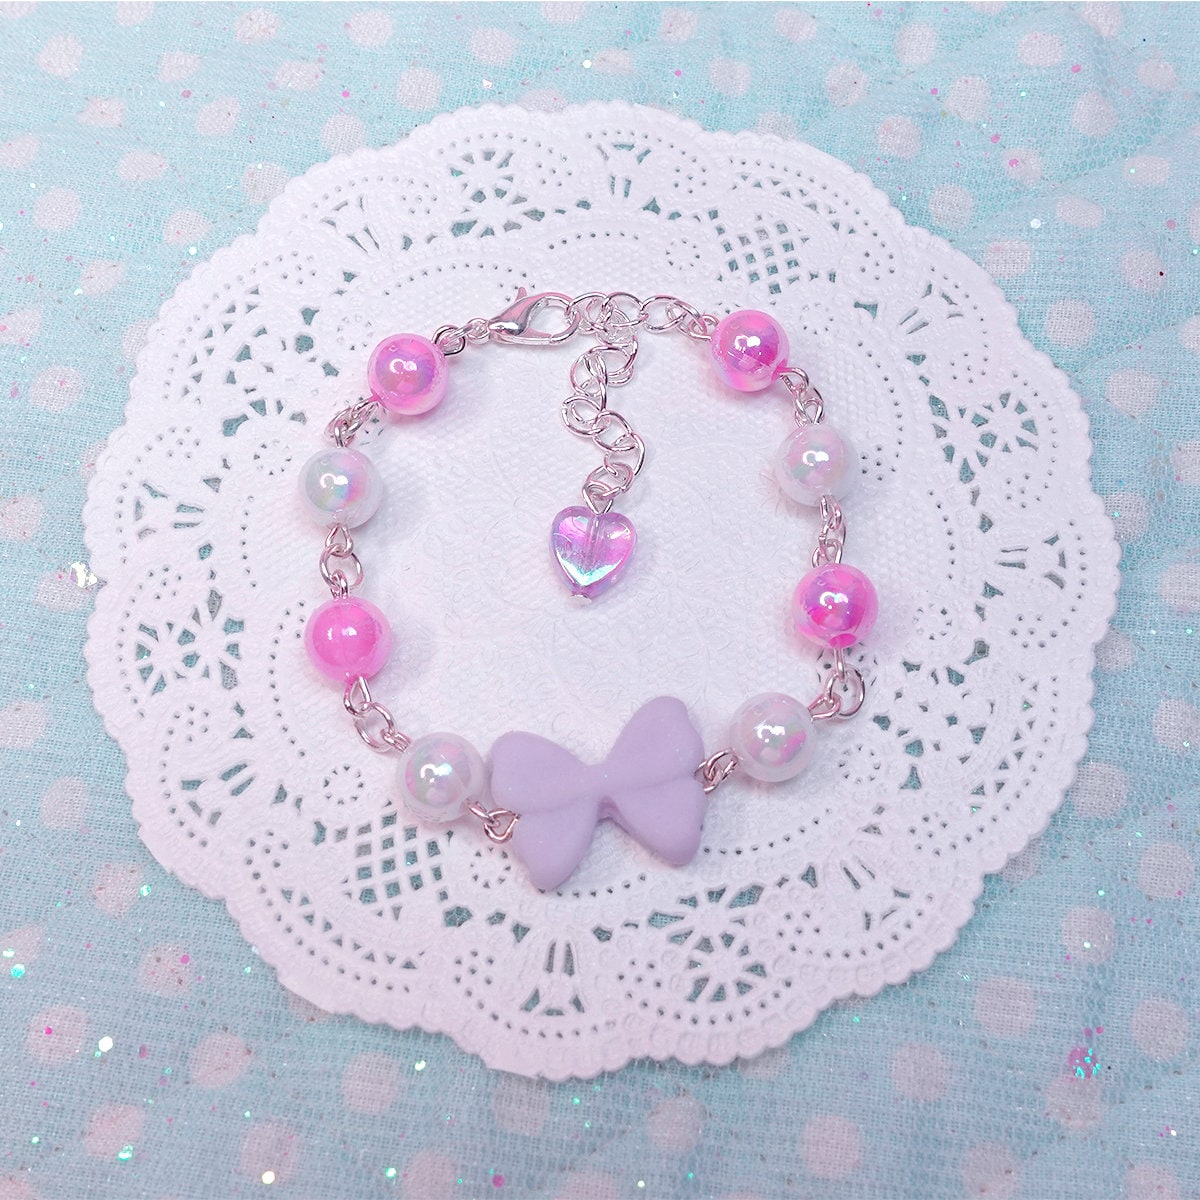 Kawaii Sweet Charms Bracelet Acrylic Beads Bracelet With Fake Sweets Charms  Christmas Gift for Her & for Teen Girls 